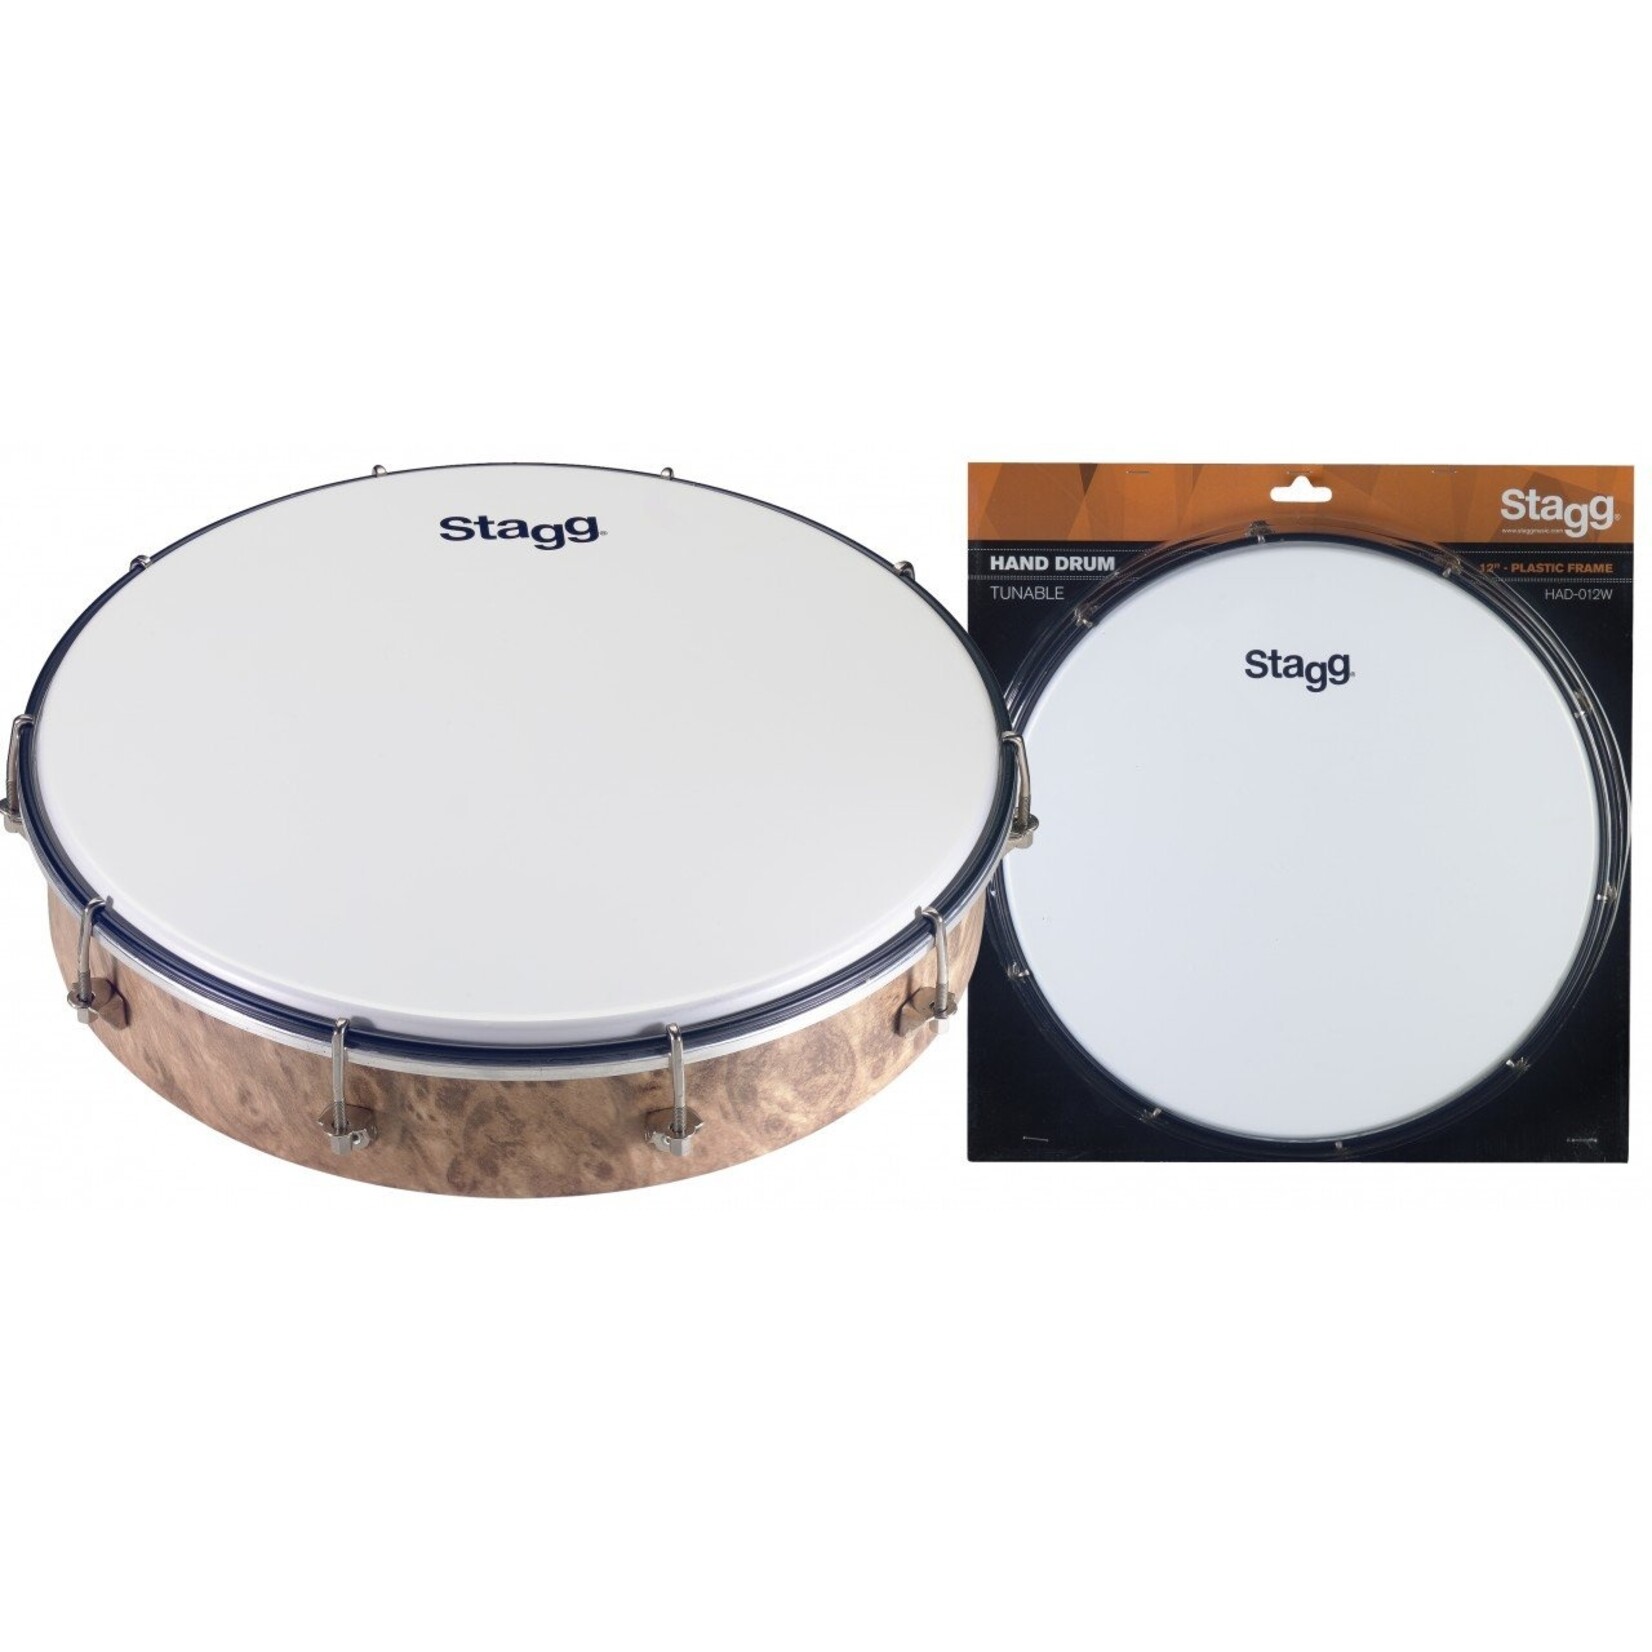 Stagg 12" Tuneable Plastic Hand-Drum